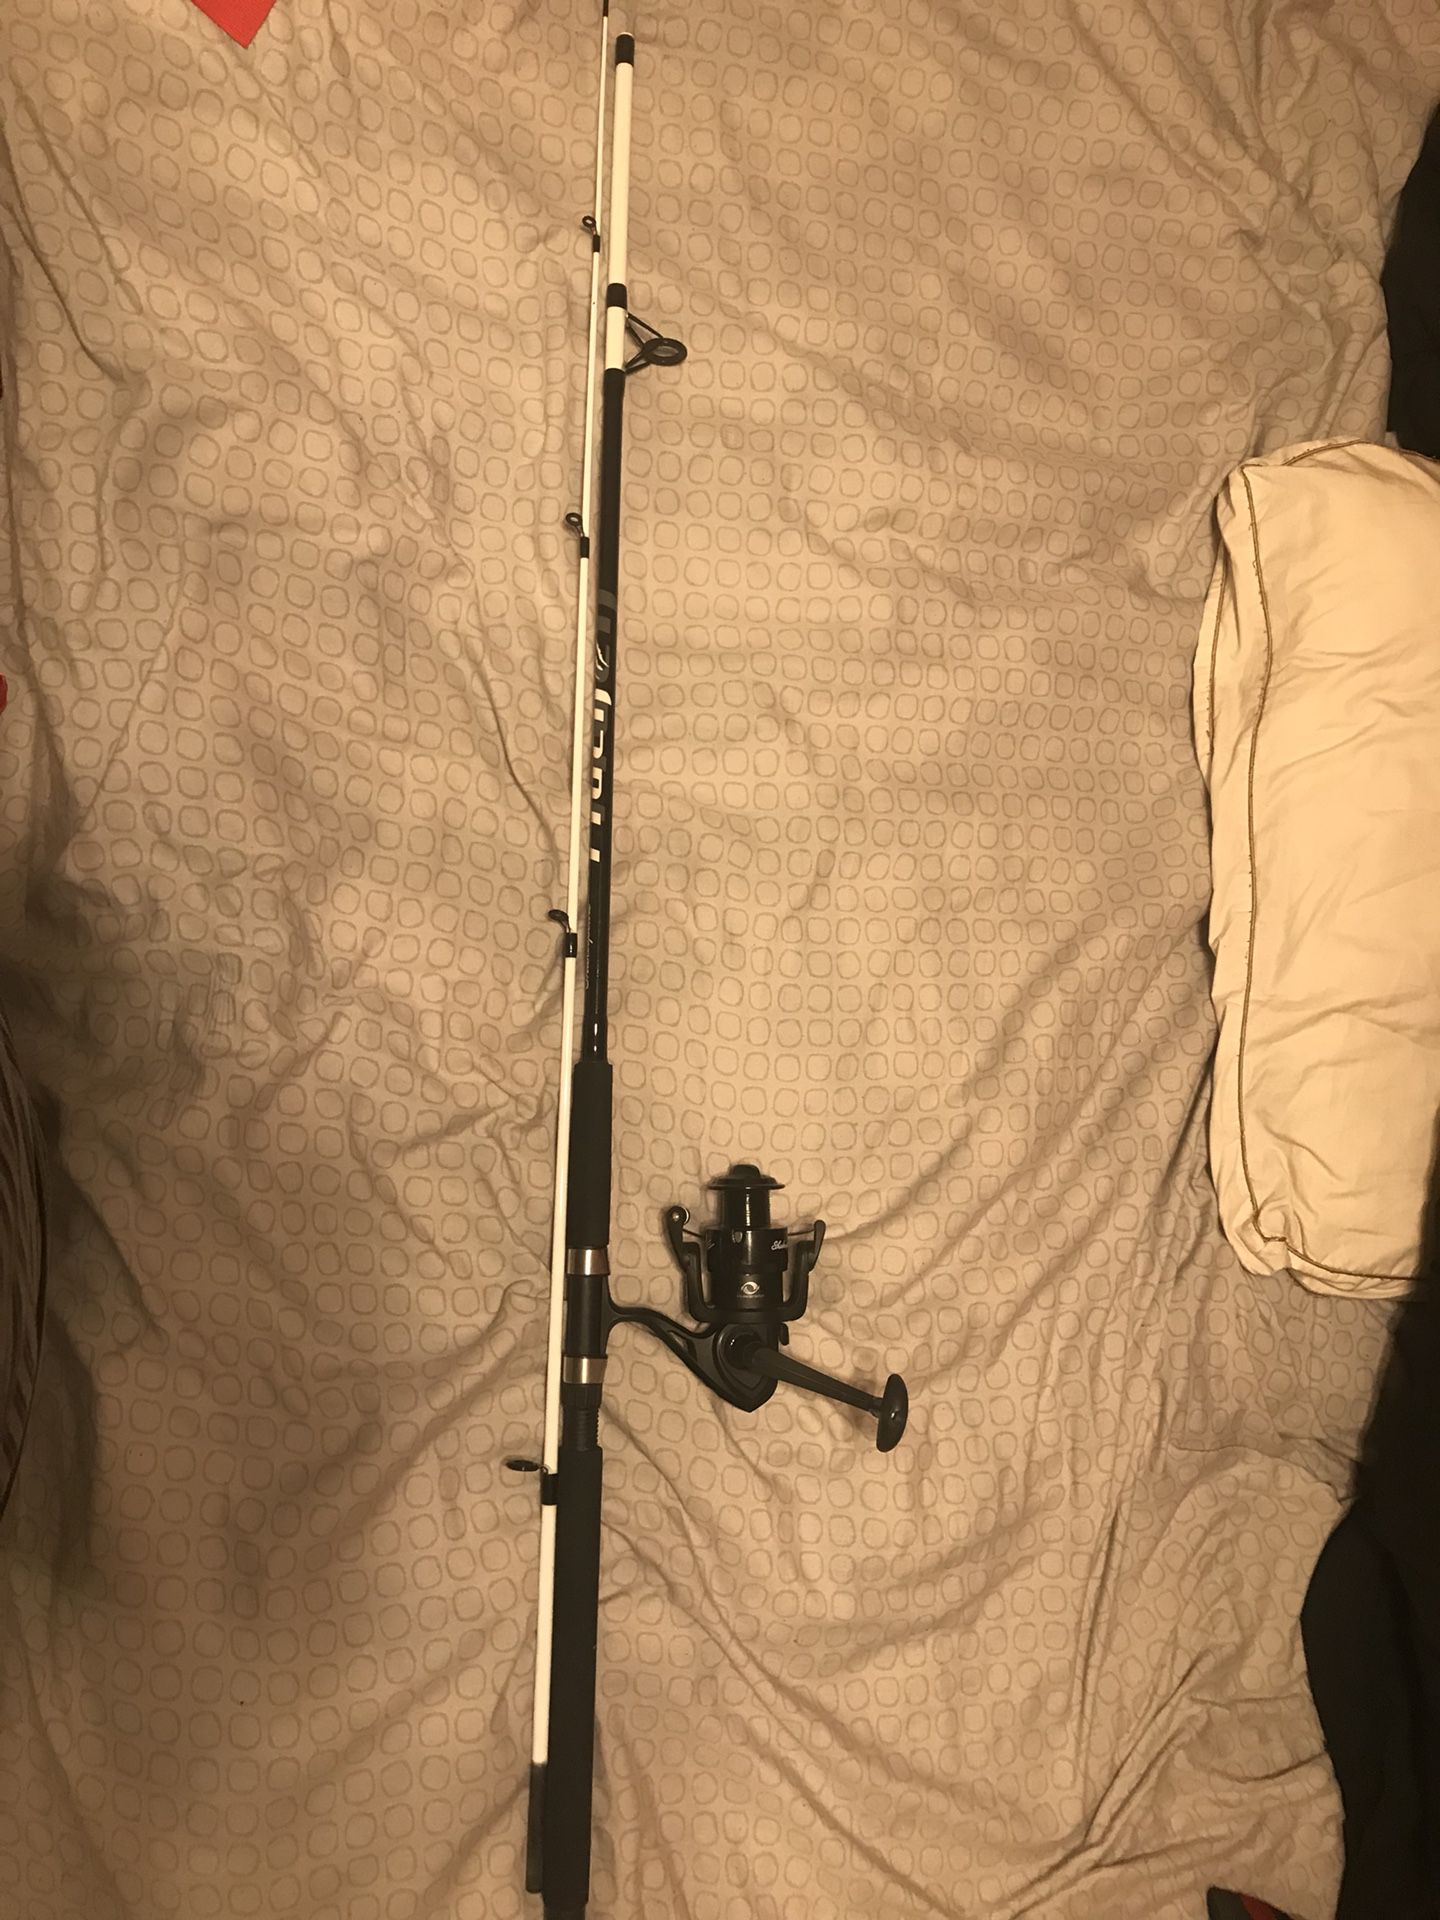 Shakespeare tiger fishing rod and reel